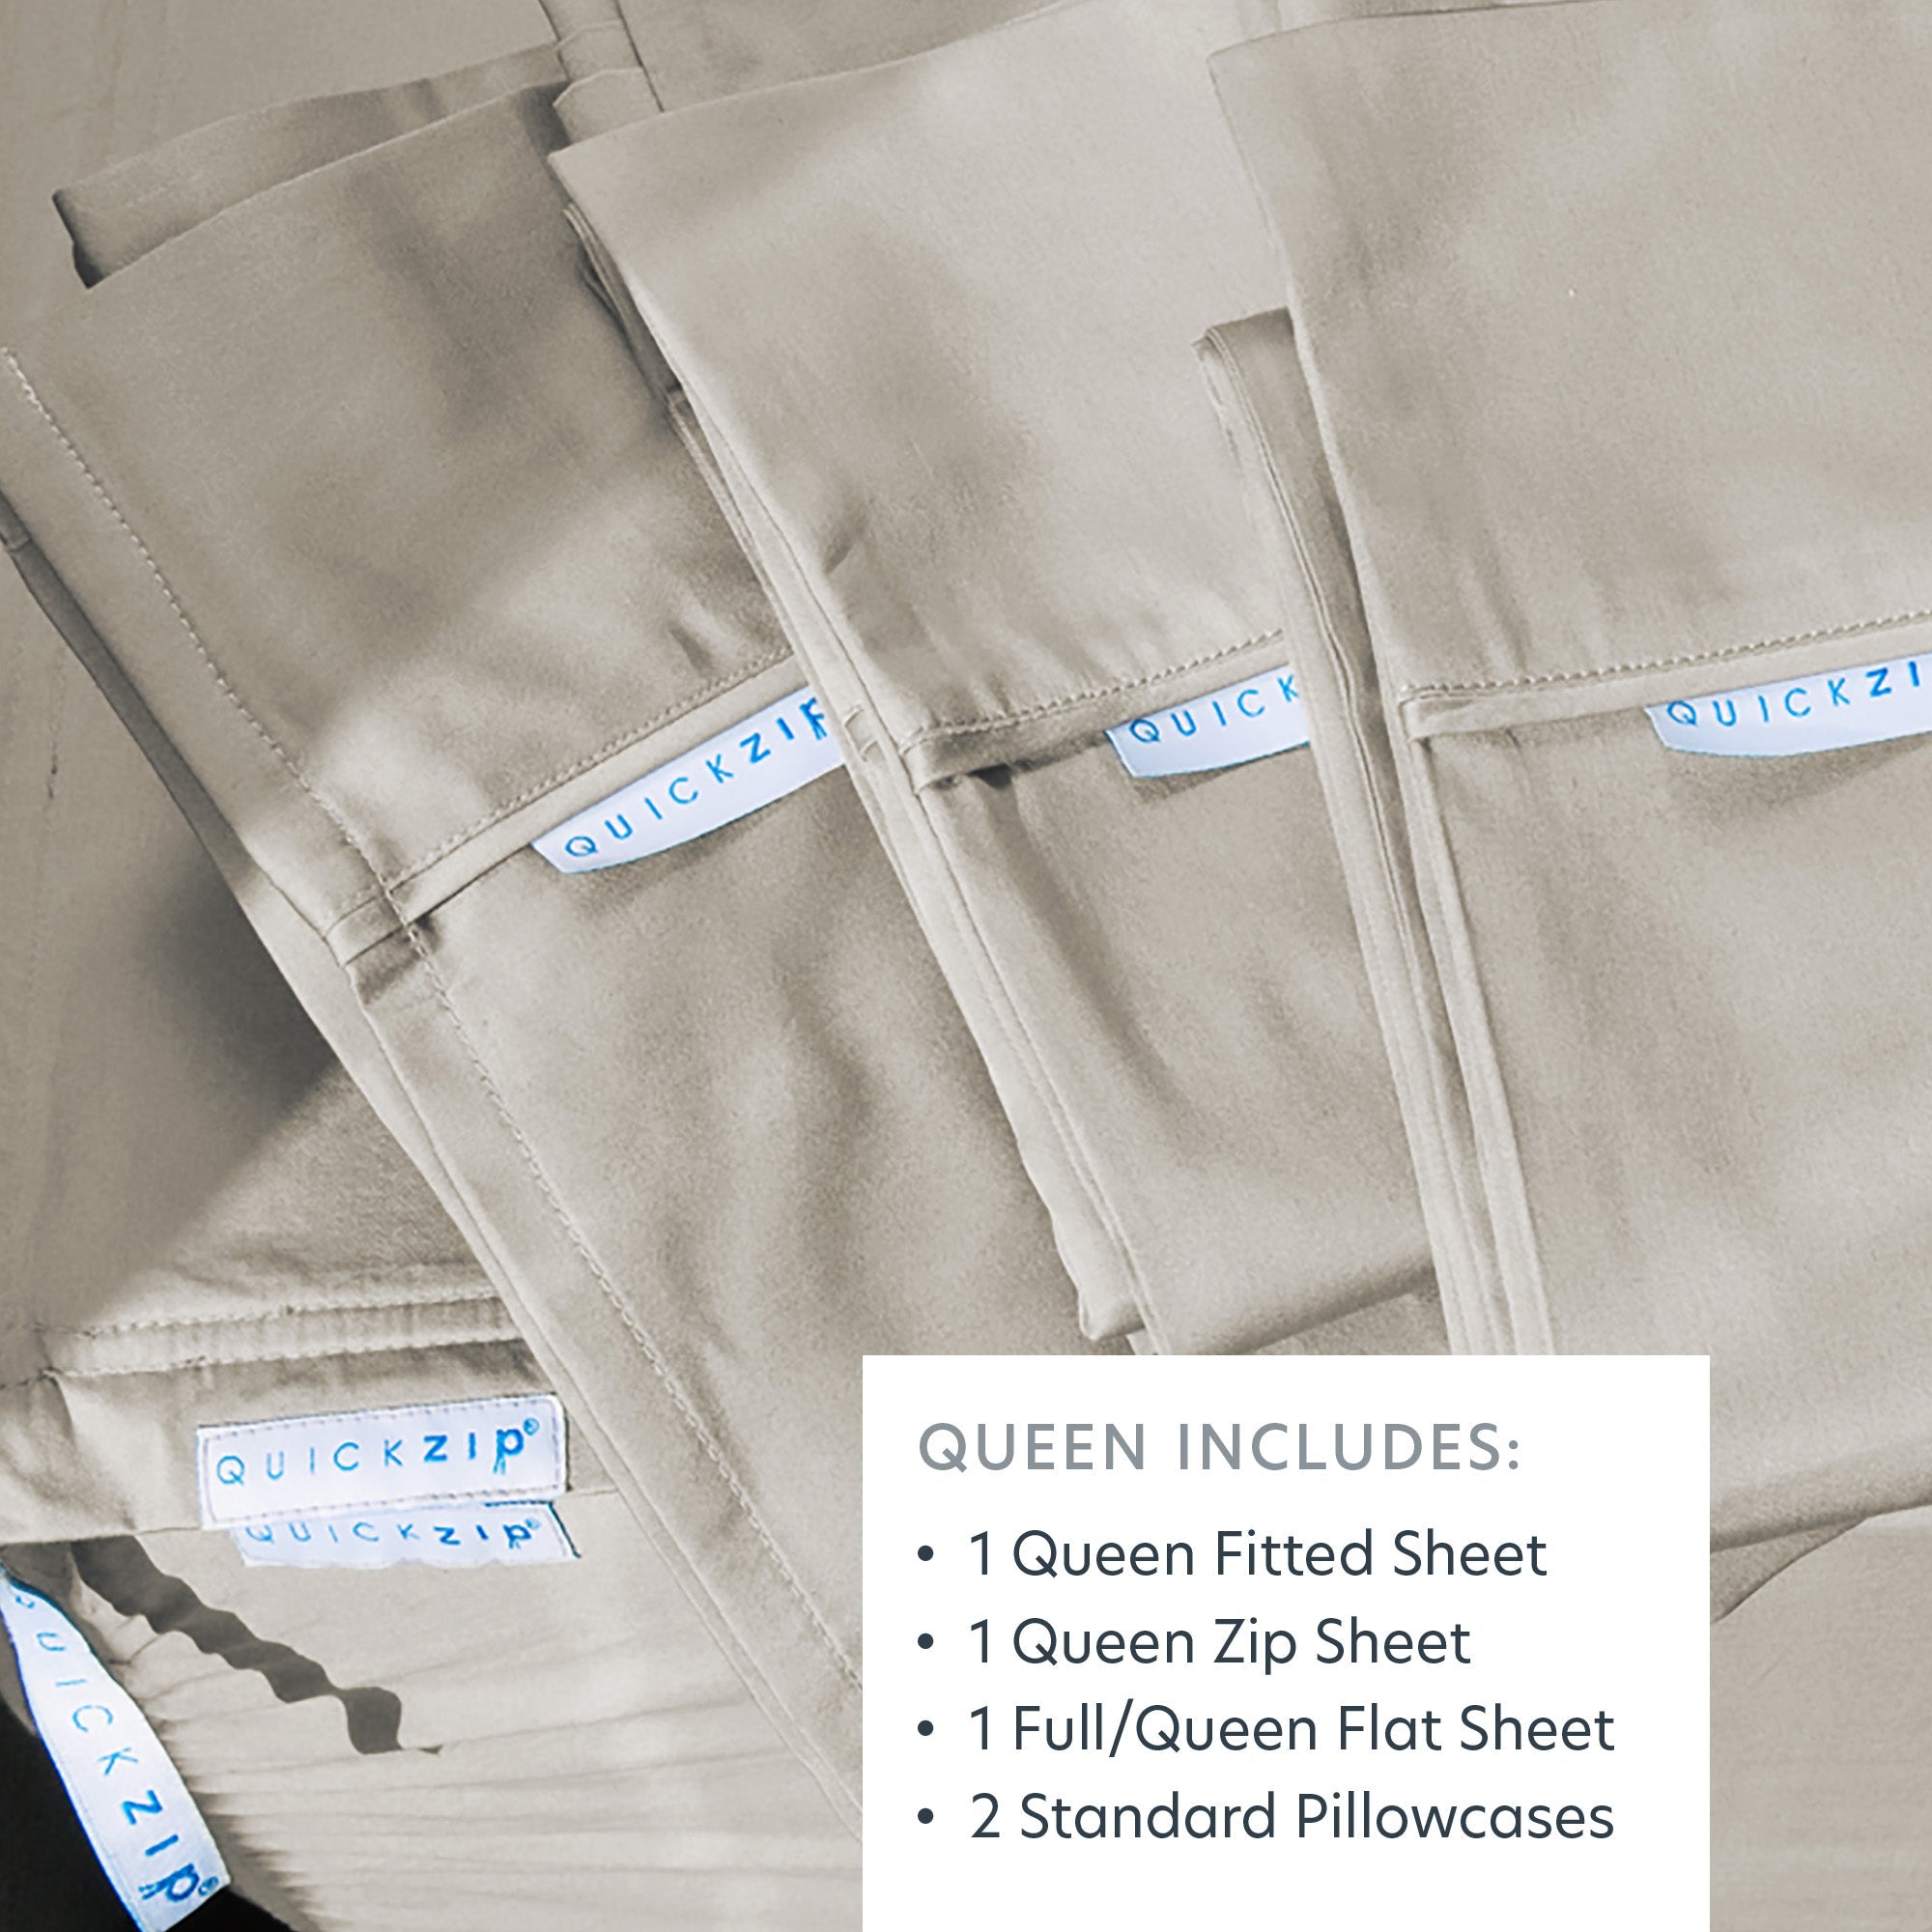 QuickZip Classic Bundle | More Comfort.  Less Hassle. Sheets that Zip Off and On and Won't Pop Off! | Sateen Cotton | Fitted Sheet (Base + Zip Sheet) + Extra Zip Sheet; Flat Sheet; 2 Pillowcases